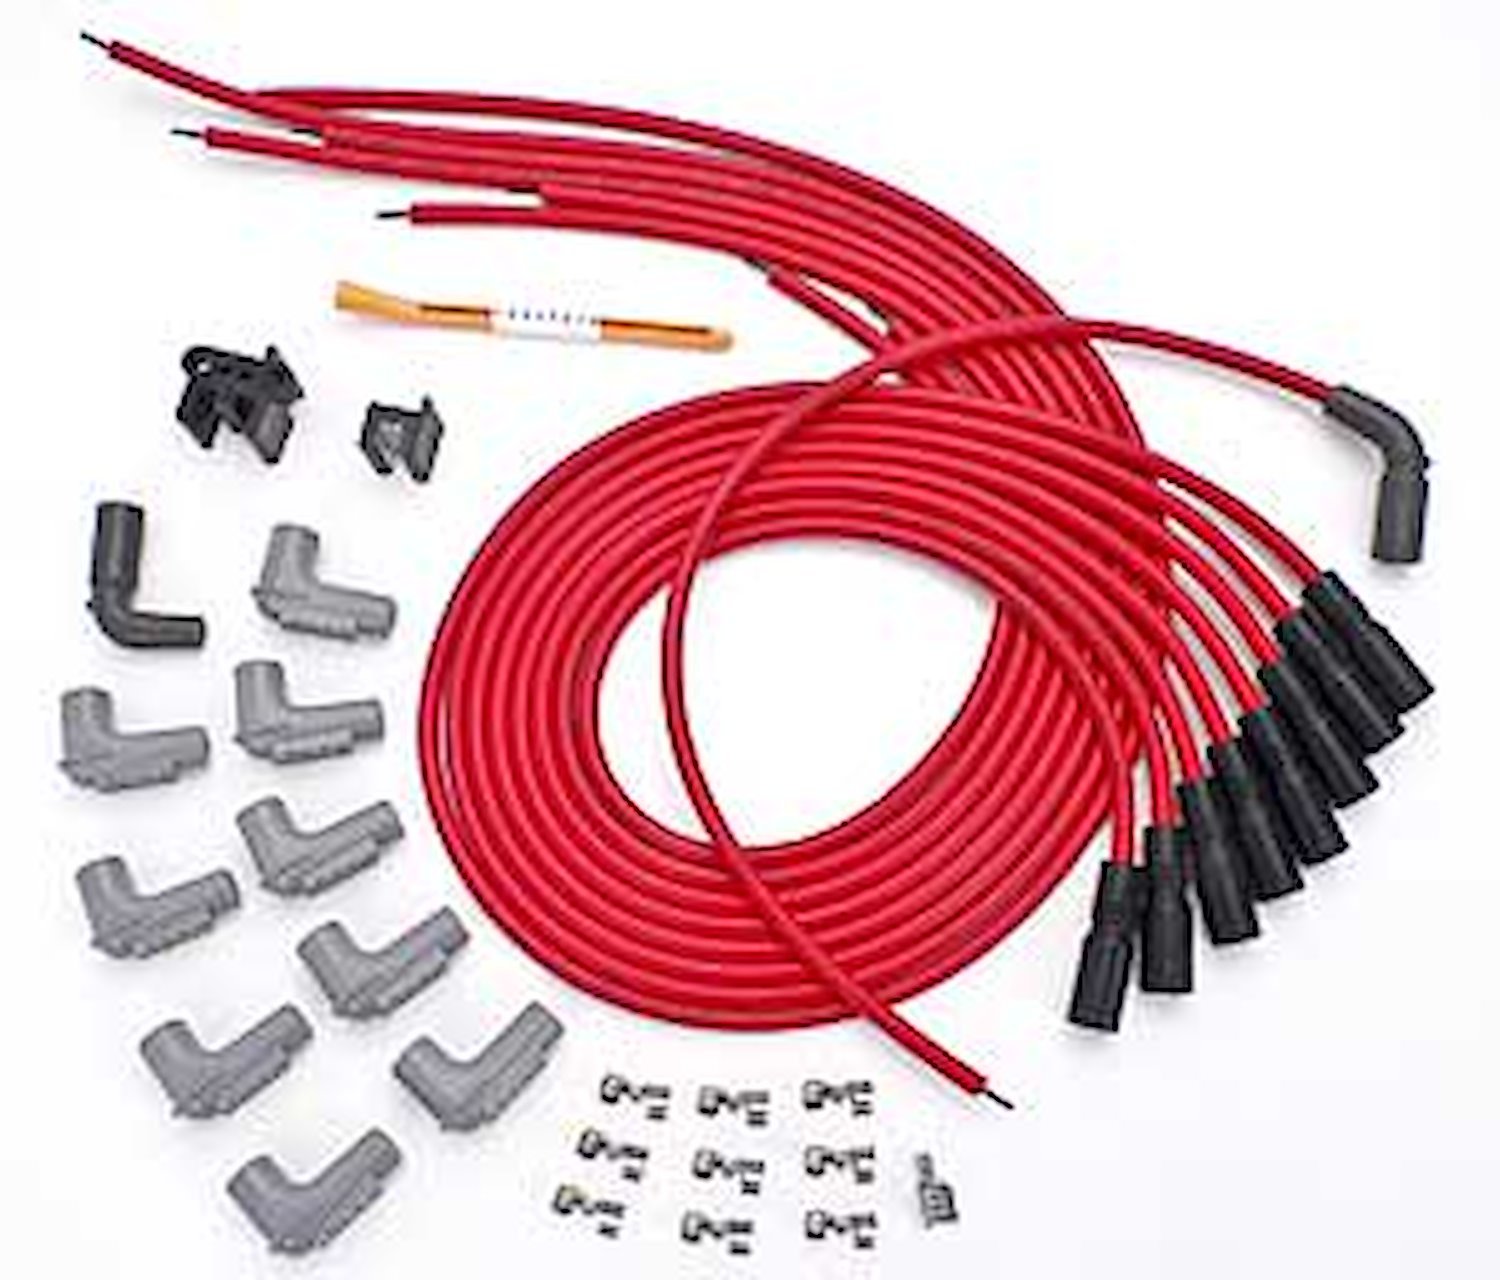 Buy Super Conductor Spark Plug Wire Set, Universal Chevy, LT1 w/90